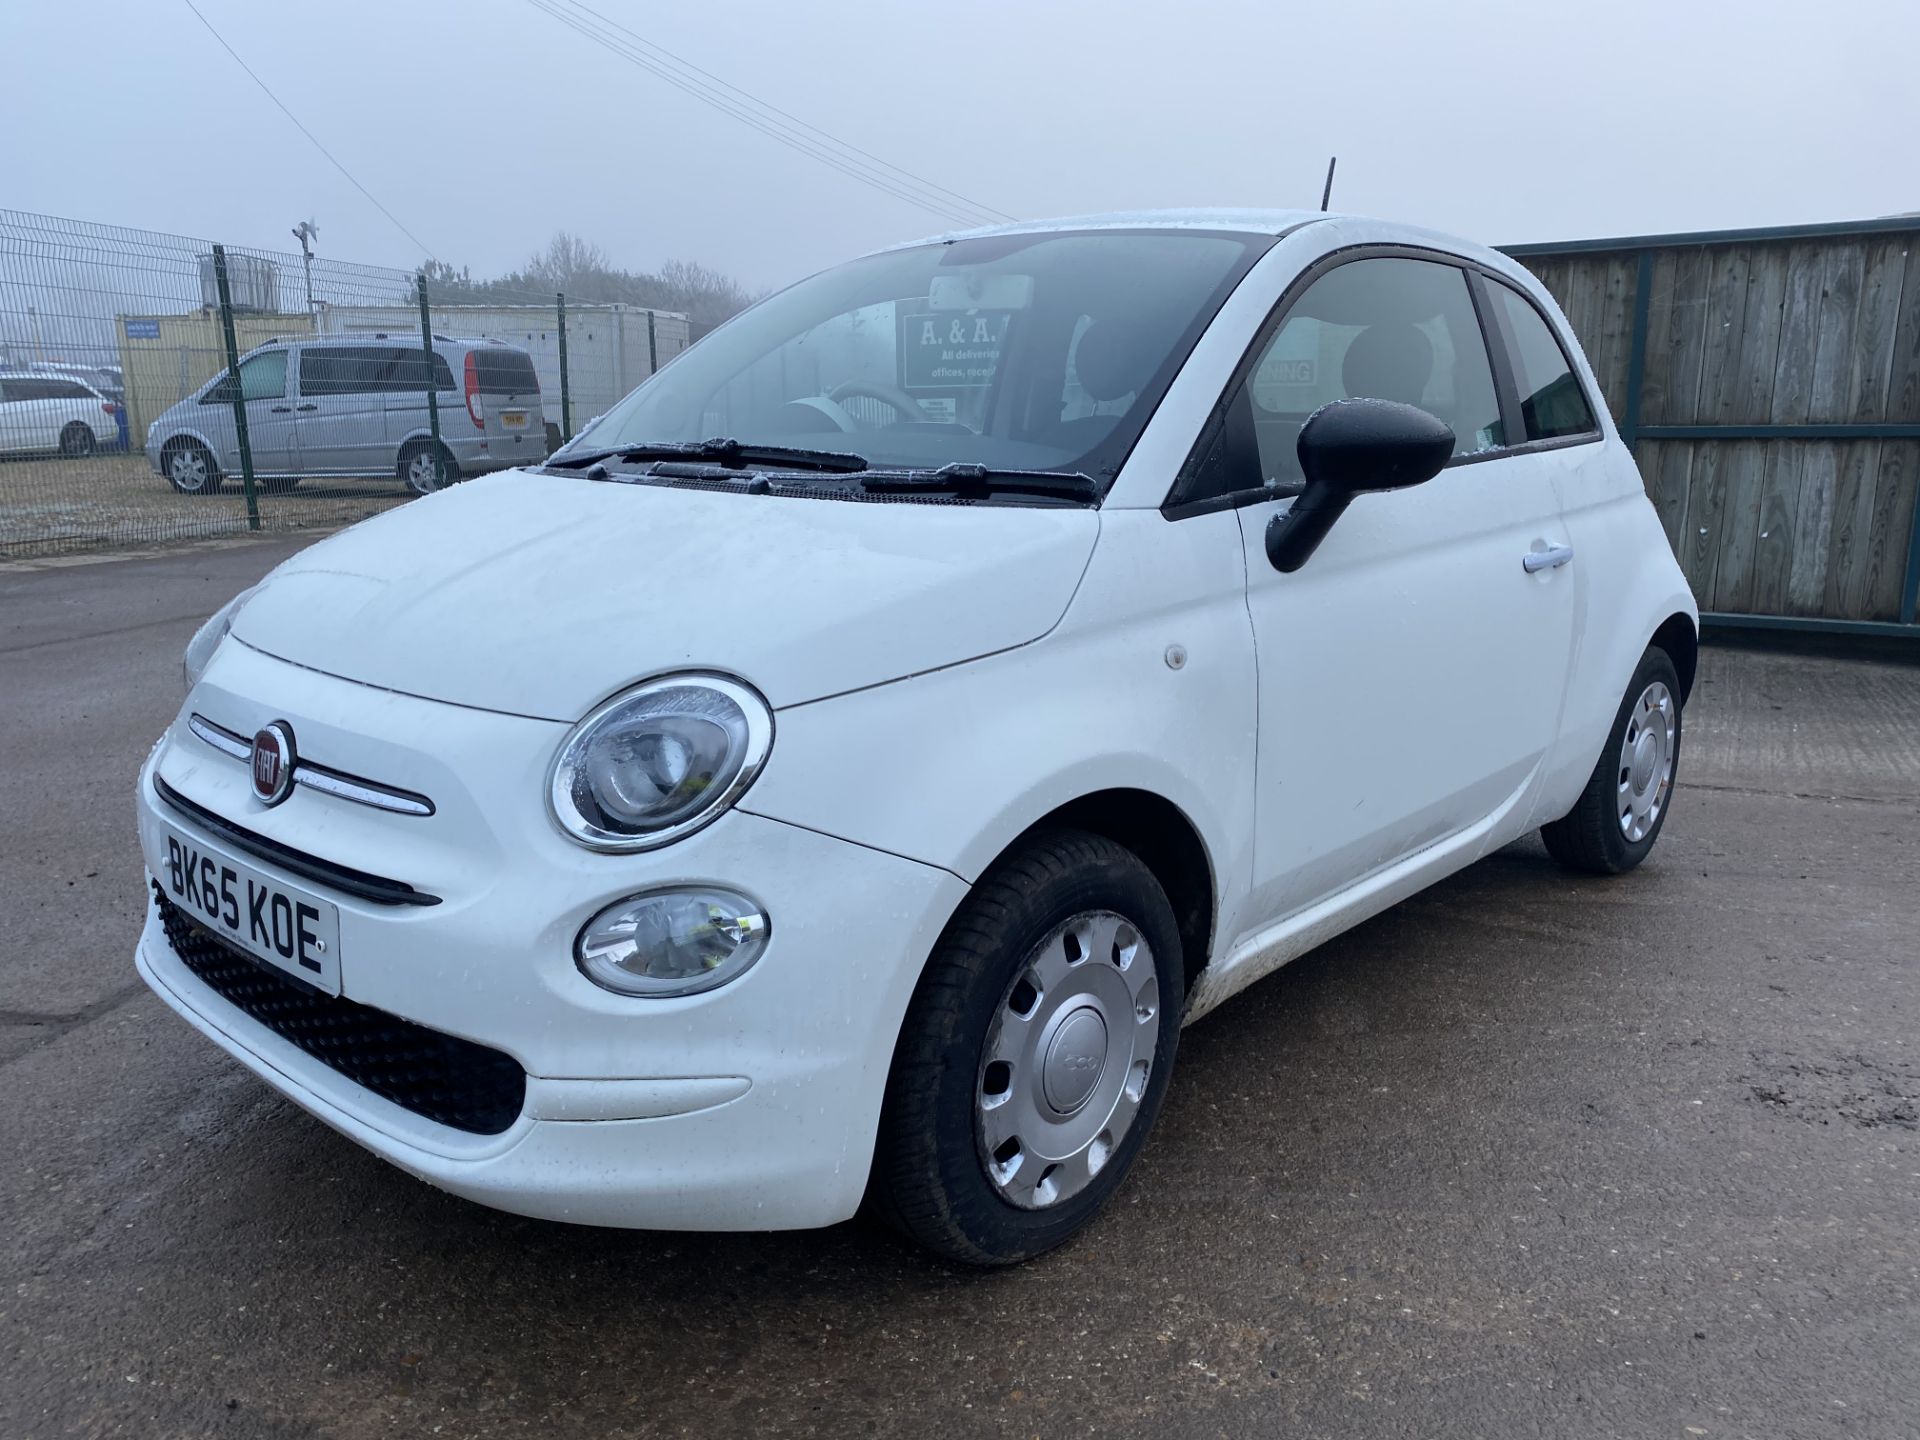 On Sale FIAT 500 "POP" 1.2 PETROL - 2016 MODEL - 1 KEEPER - ONLY 44K MILES FROM NEW - AIR CON - LOOK - Image 4 of 18